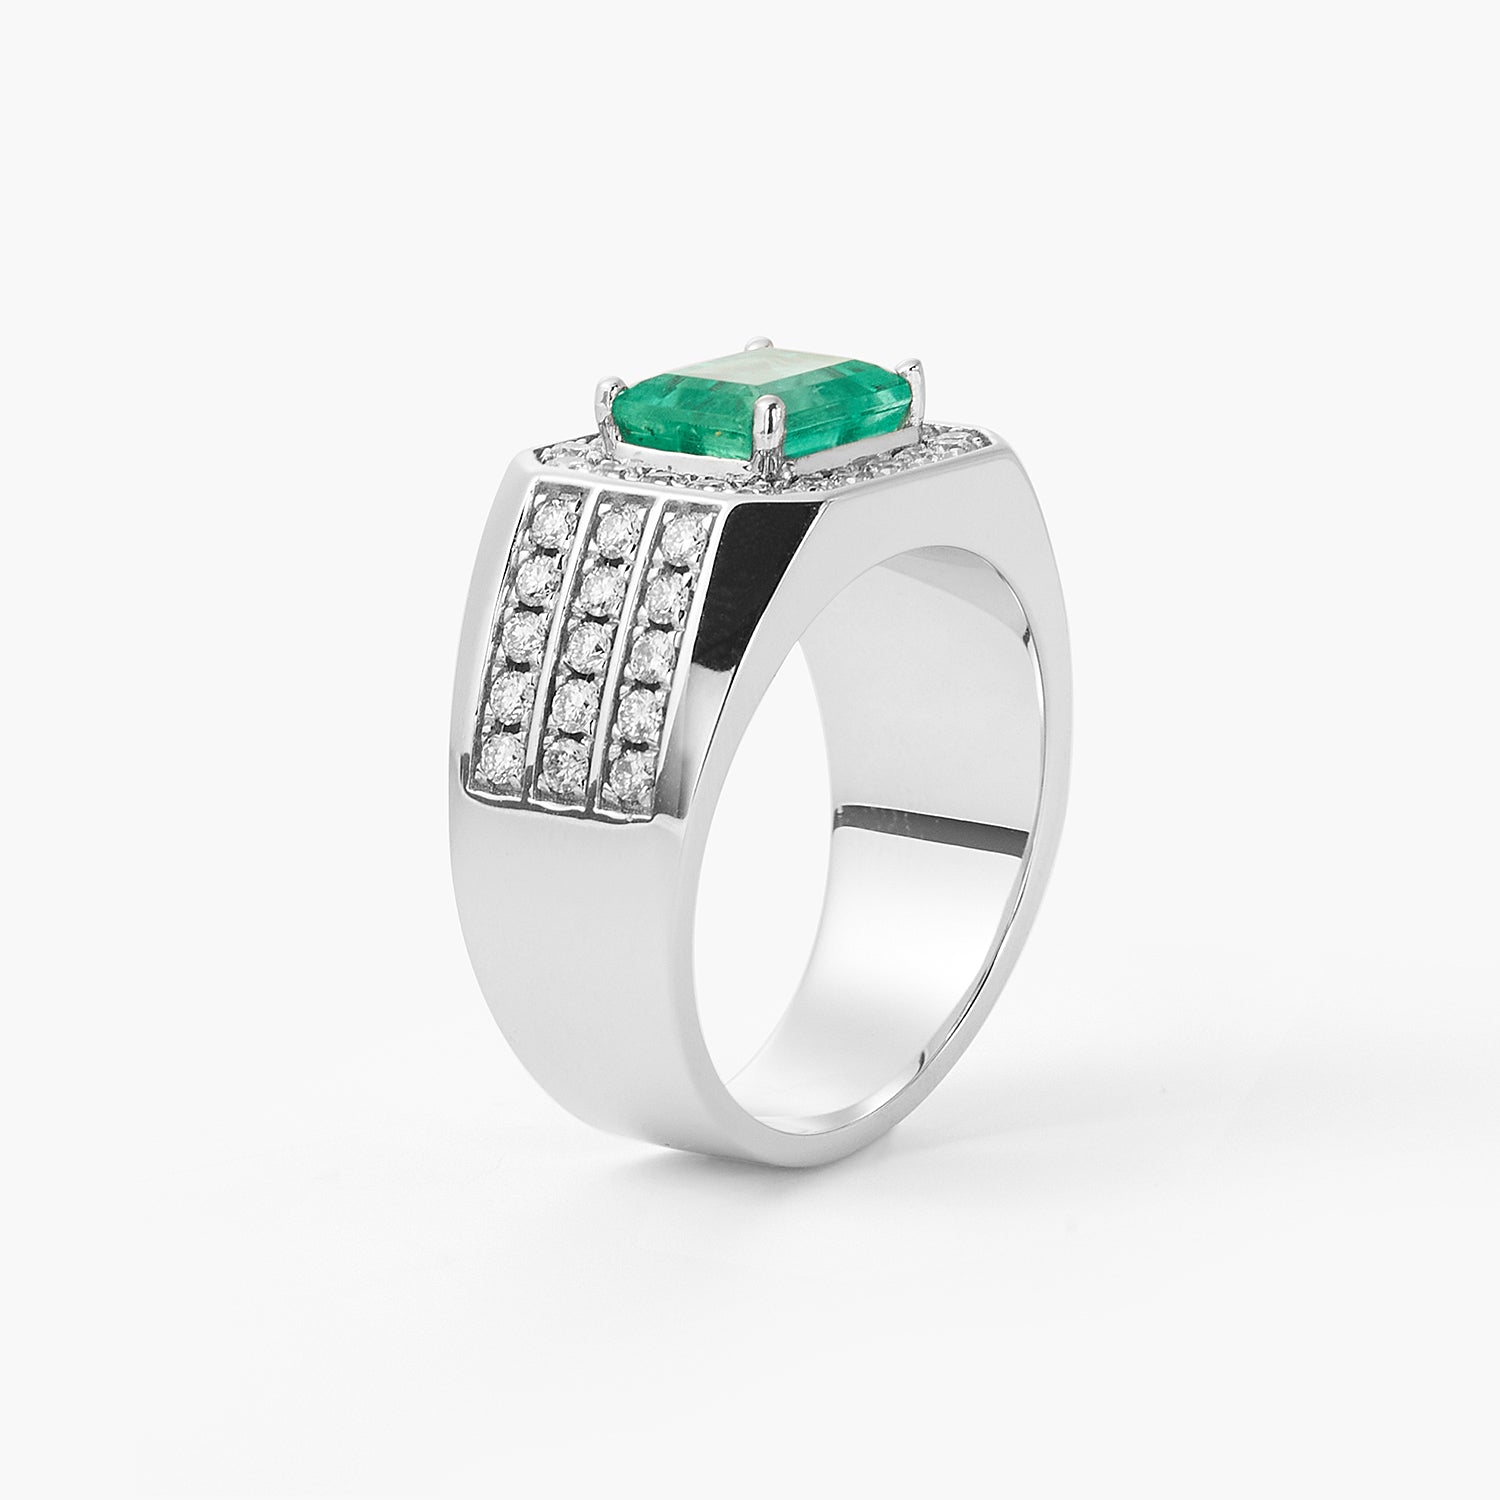 4.75 Carats Certified Emerald Mens Ring in 18k Gold - Gleam Jewels